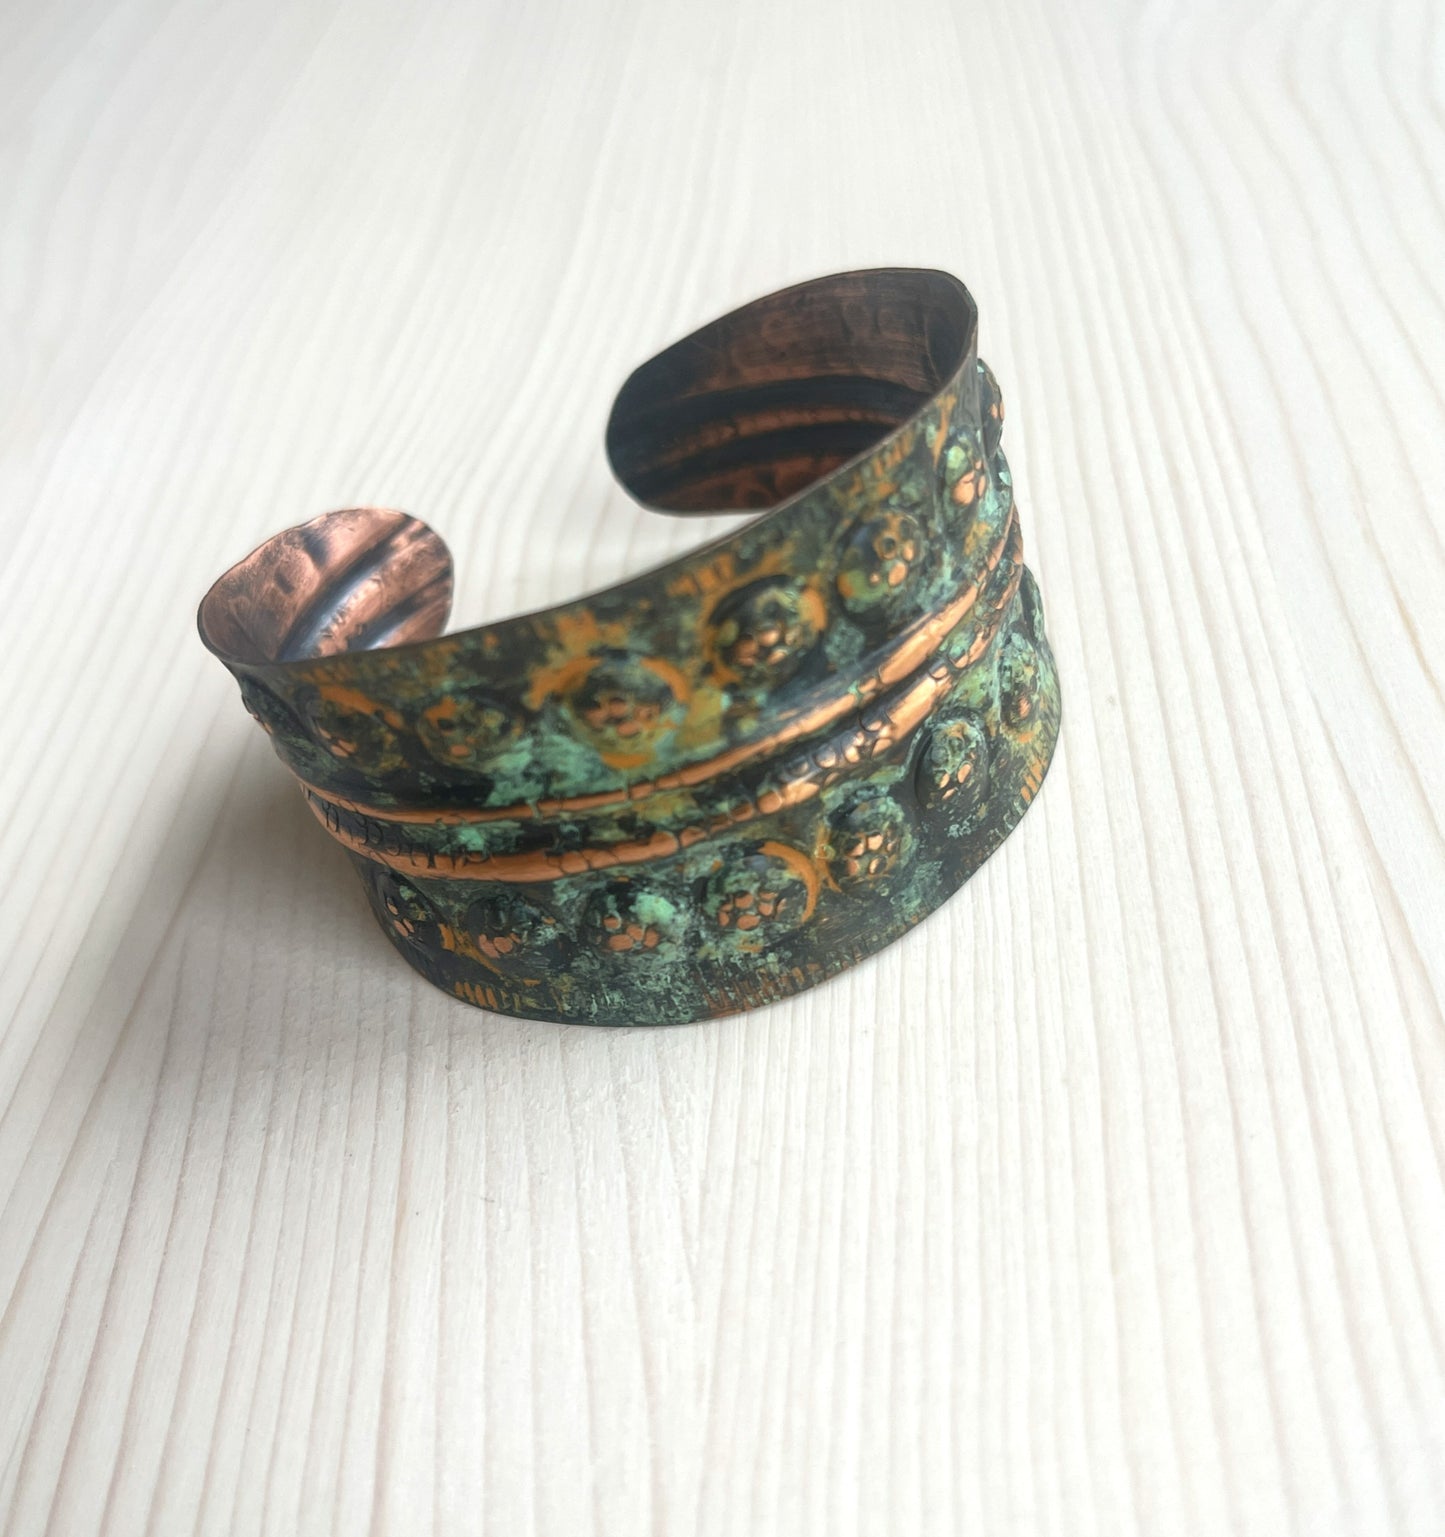 Handmade copper bracelet in a rich shades of green